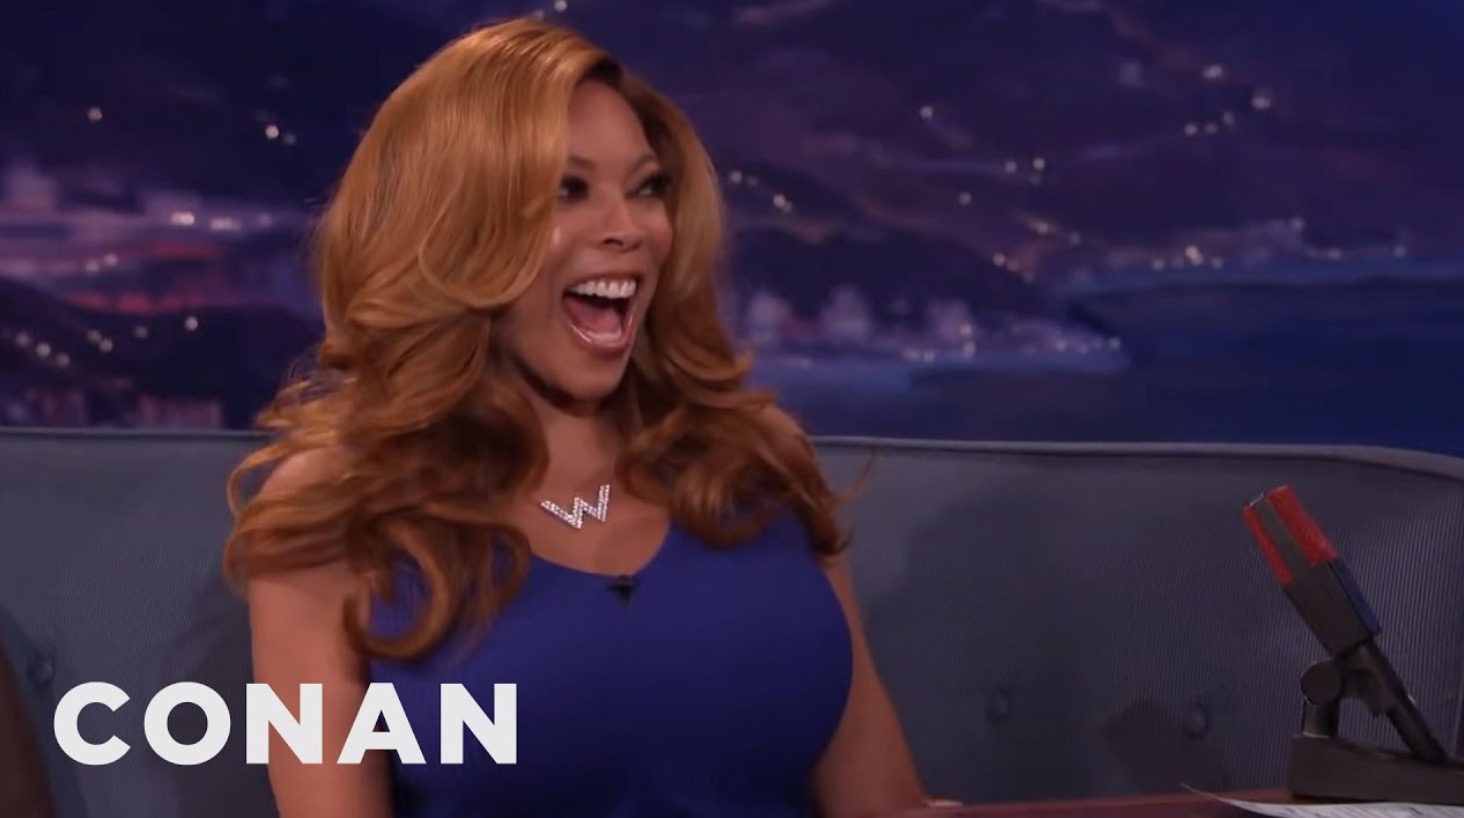 Here's The Horrifying Story Wendy Williams Told Conan O'Brien About Her Son Walking In On Her Giving Her Husband A 'Favor'